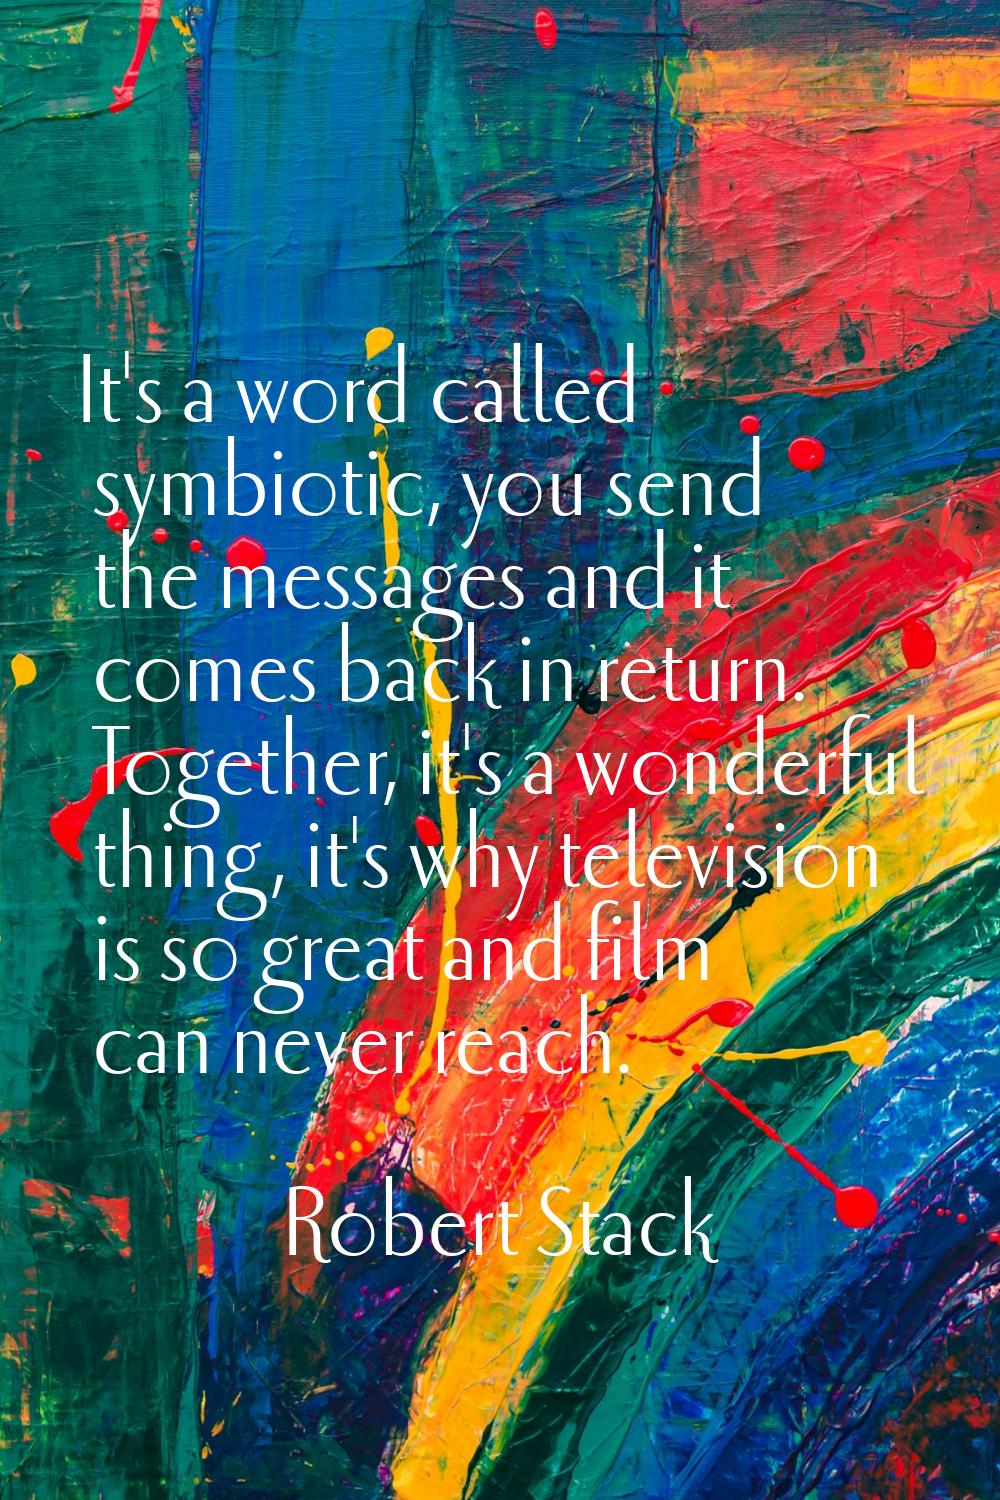 It's a word called symbiotic, you send the messages and it comes back in return. Together, it's a w